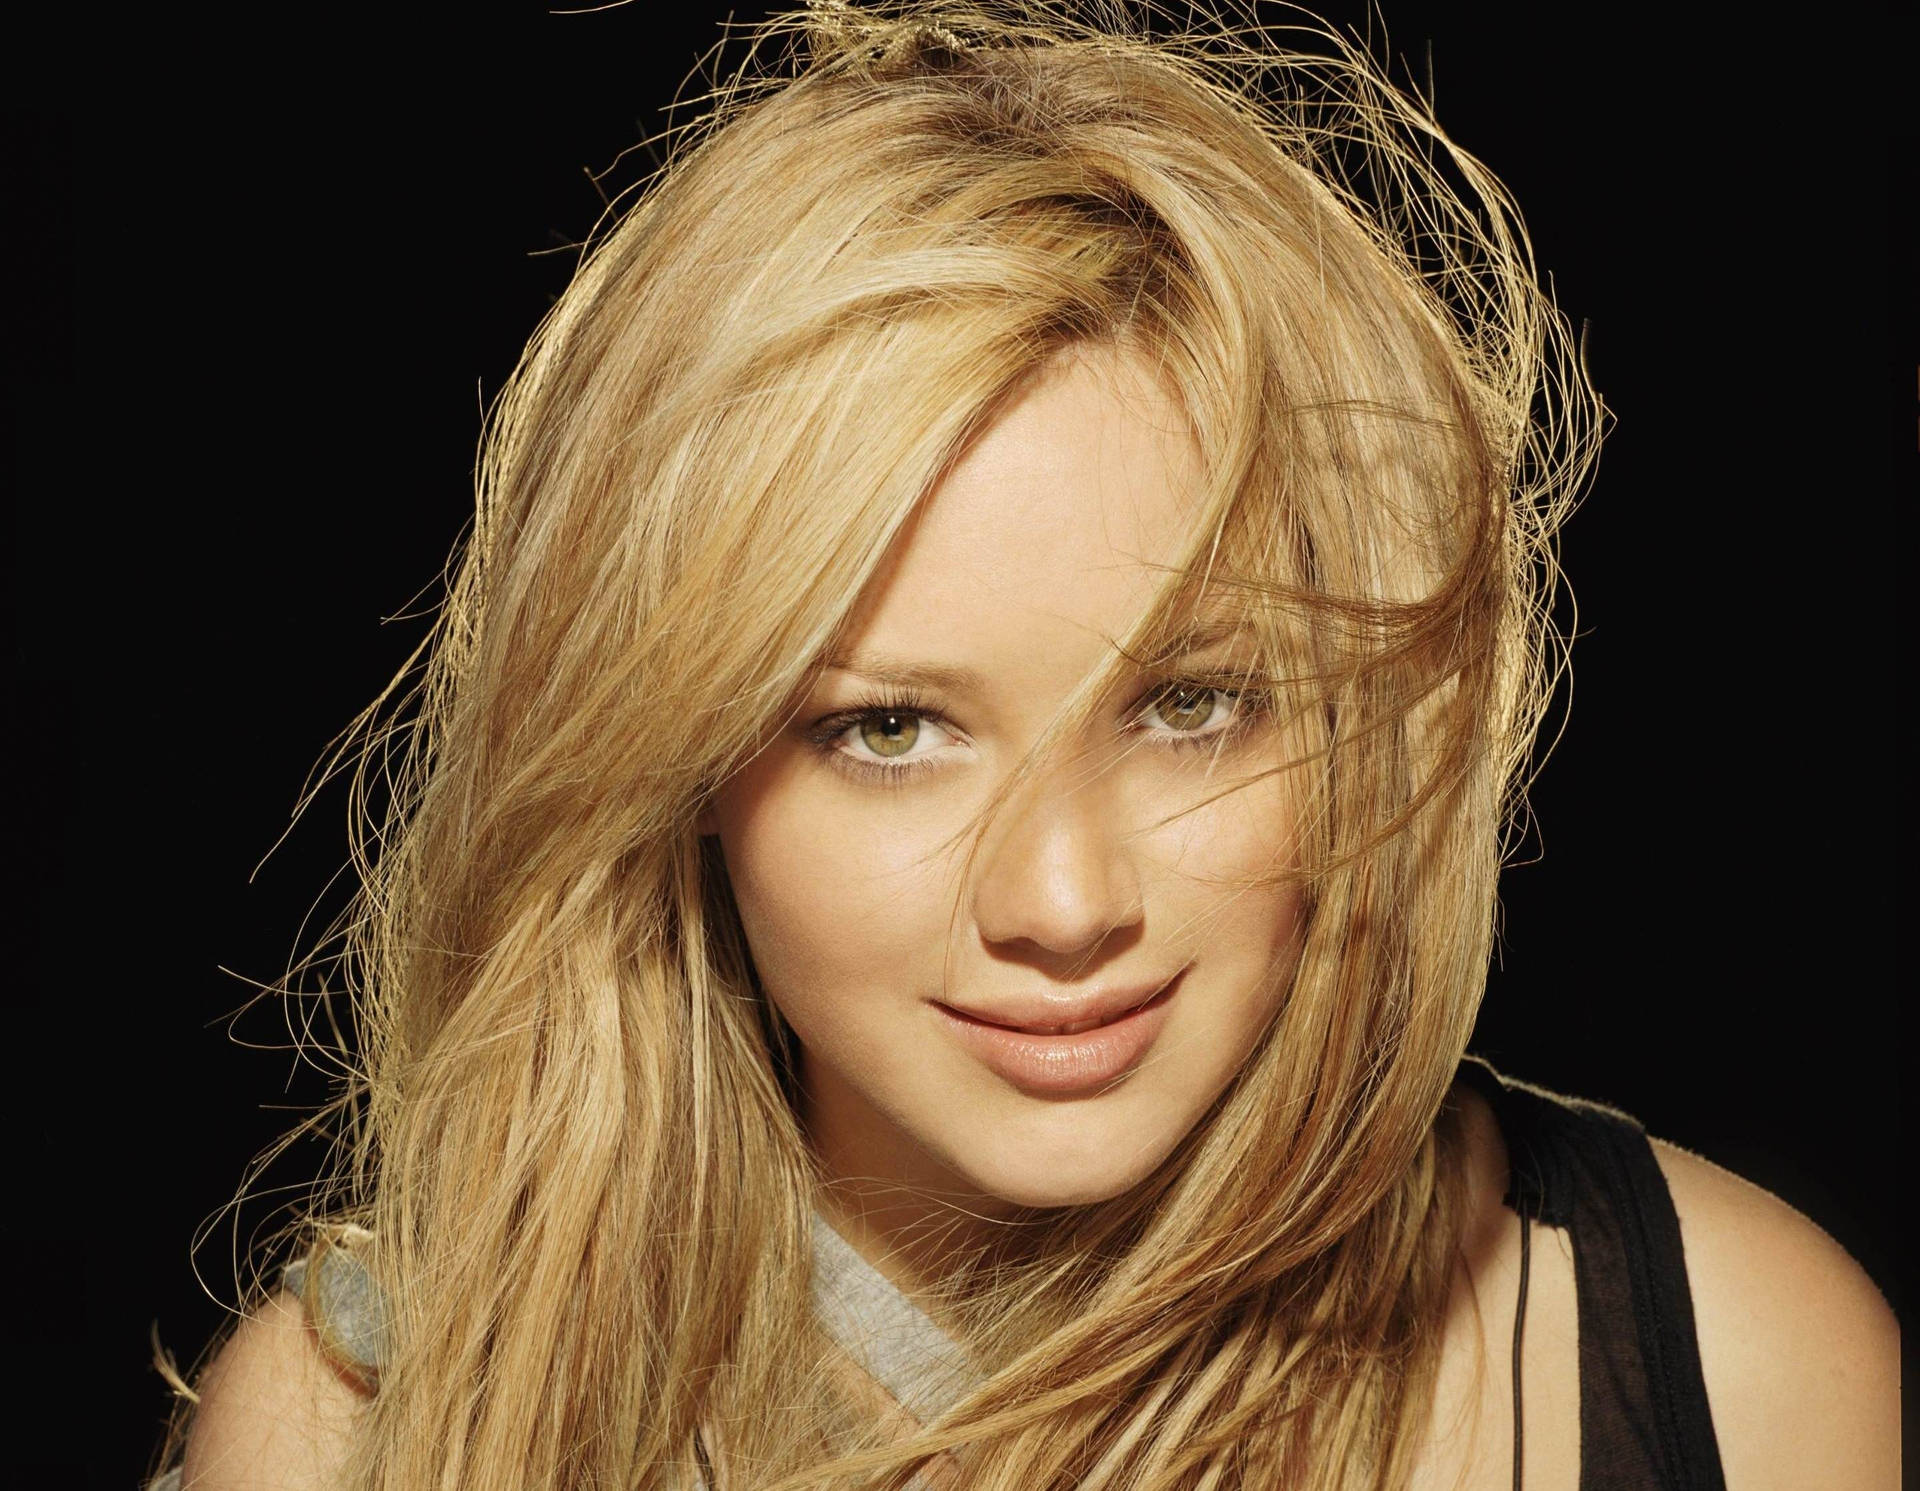 Hilary Duff With Black Backdrop Background